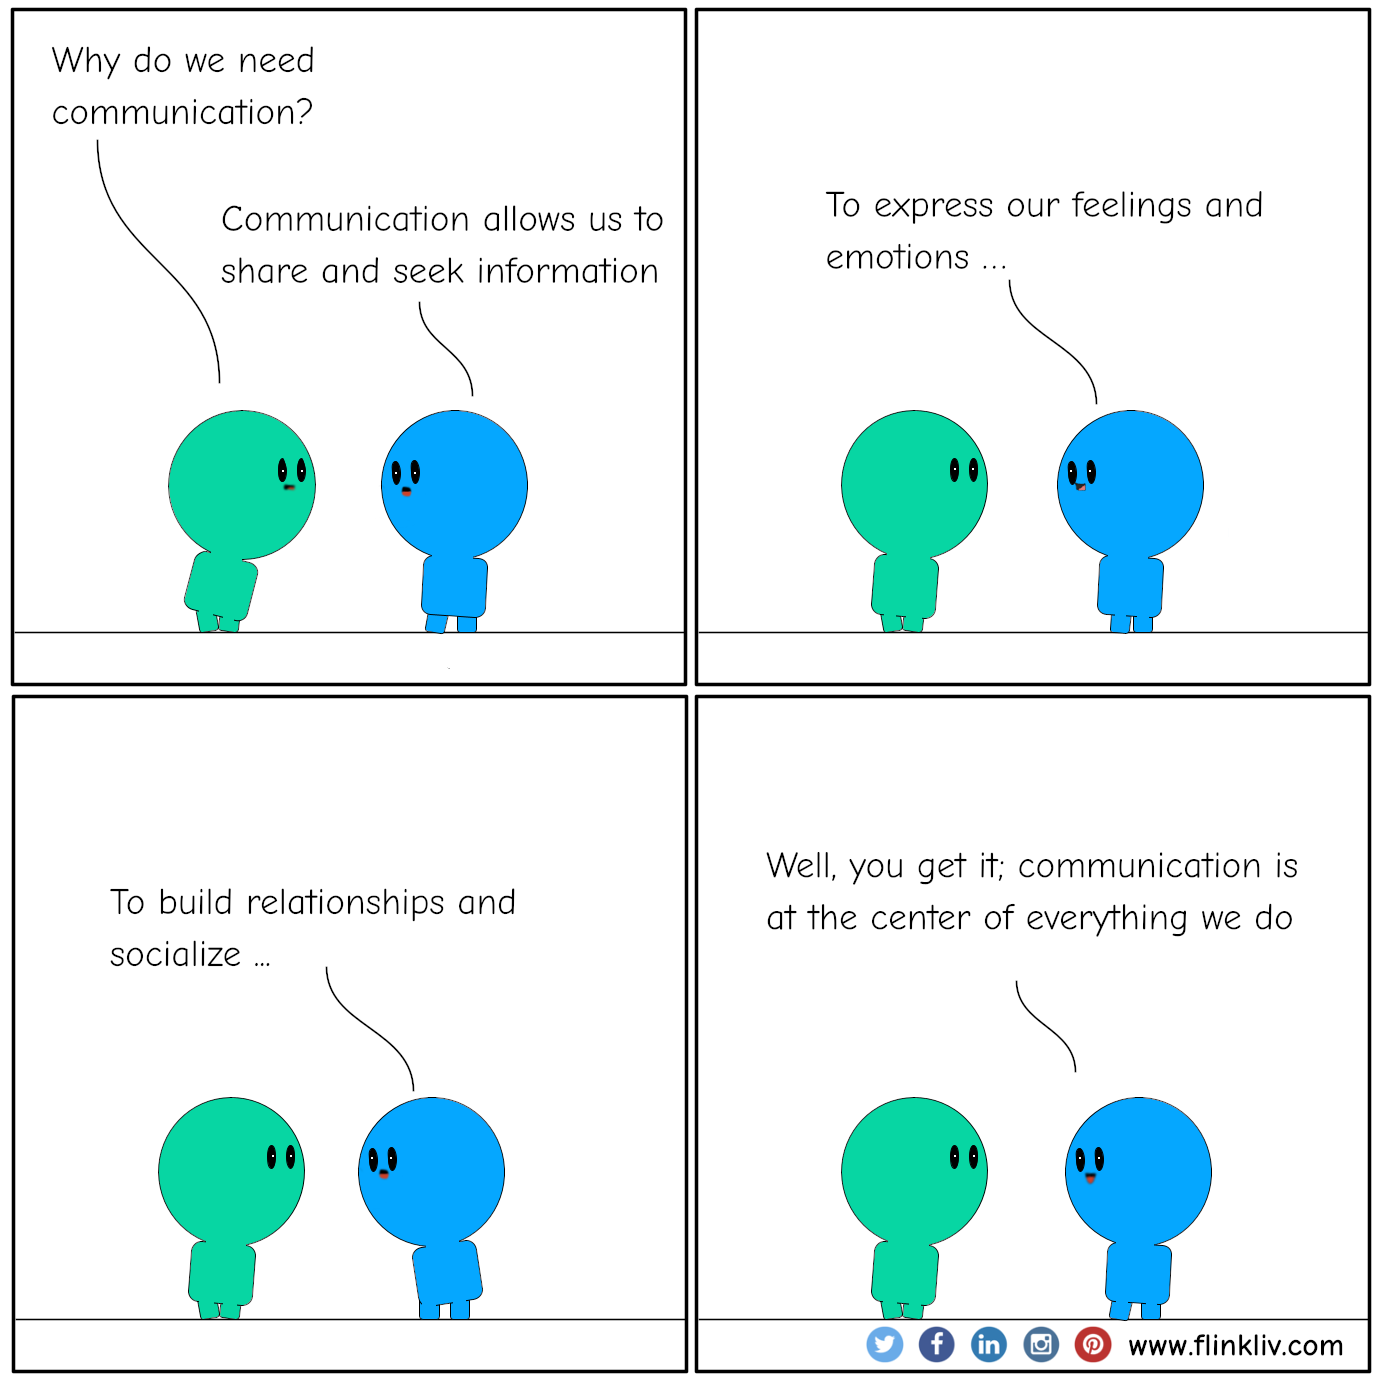 Conversation between A and B about the need to know communication. A: Why do we need communication? B: Communication allows us to share and seek information. B: to express our feelings and emotions. B: to build relationships and socialize. B: Well, you get it; communication is at the center of everything we do. By flinkliv.com